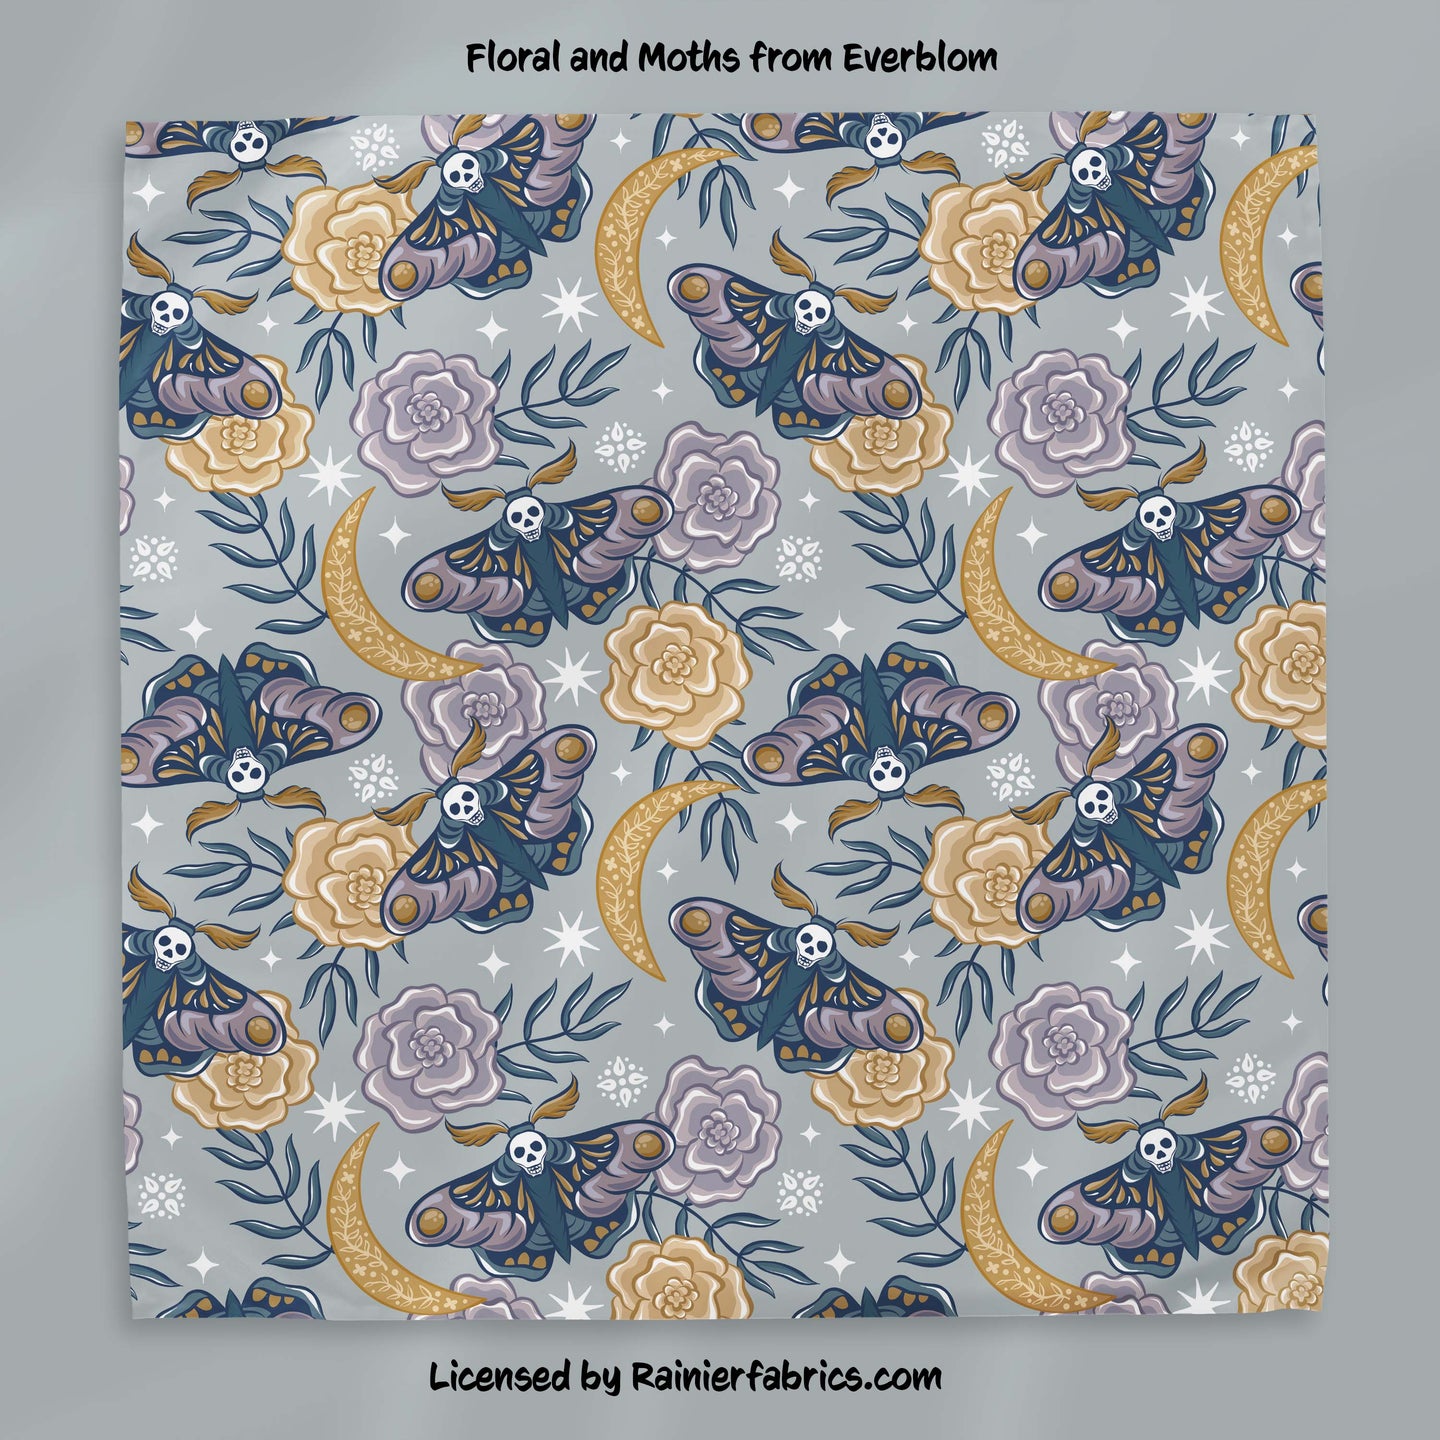 Floral Moths by Everbloom - 2-5 day TAT - Order by 1/2 yard; Blankets and towels available too